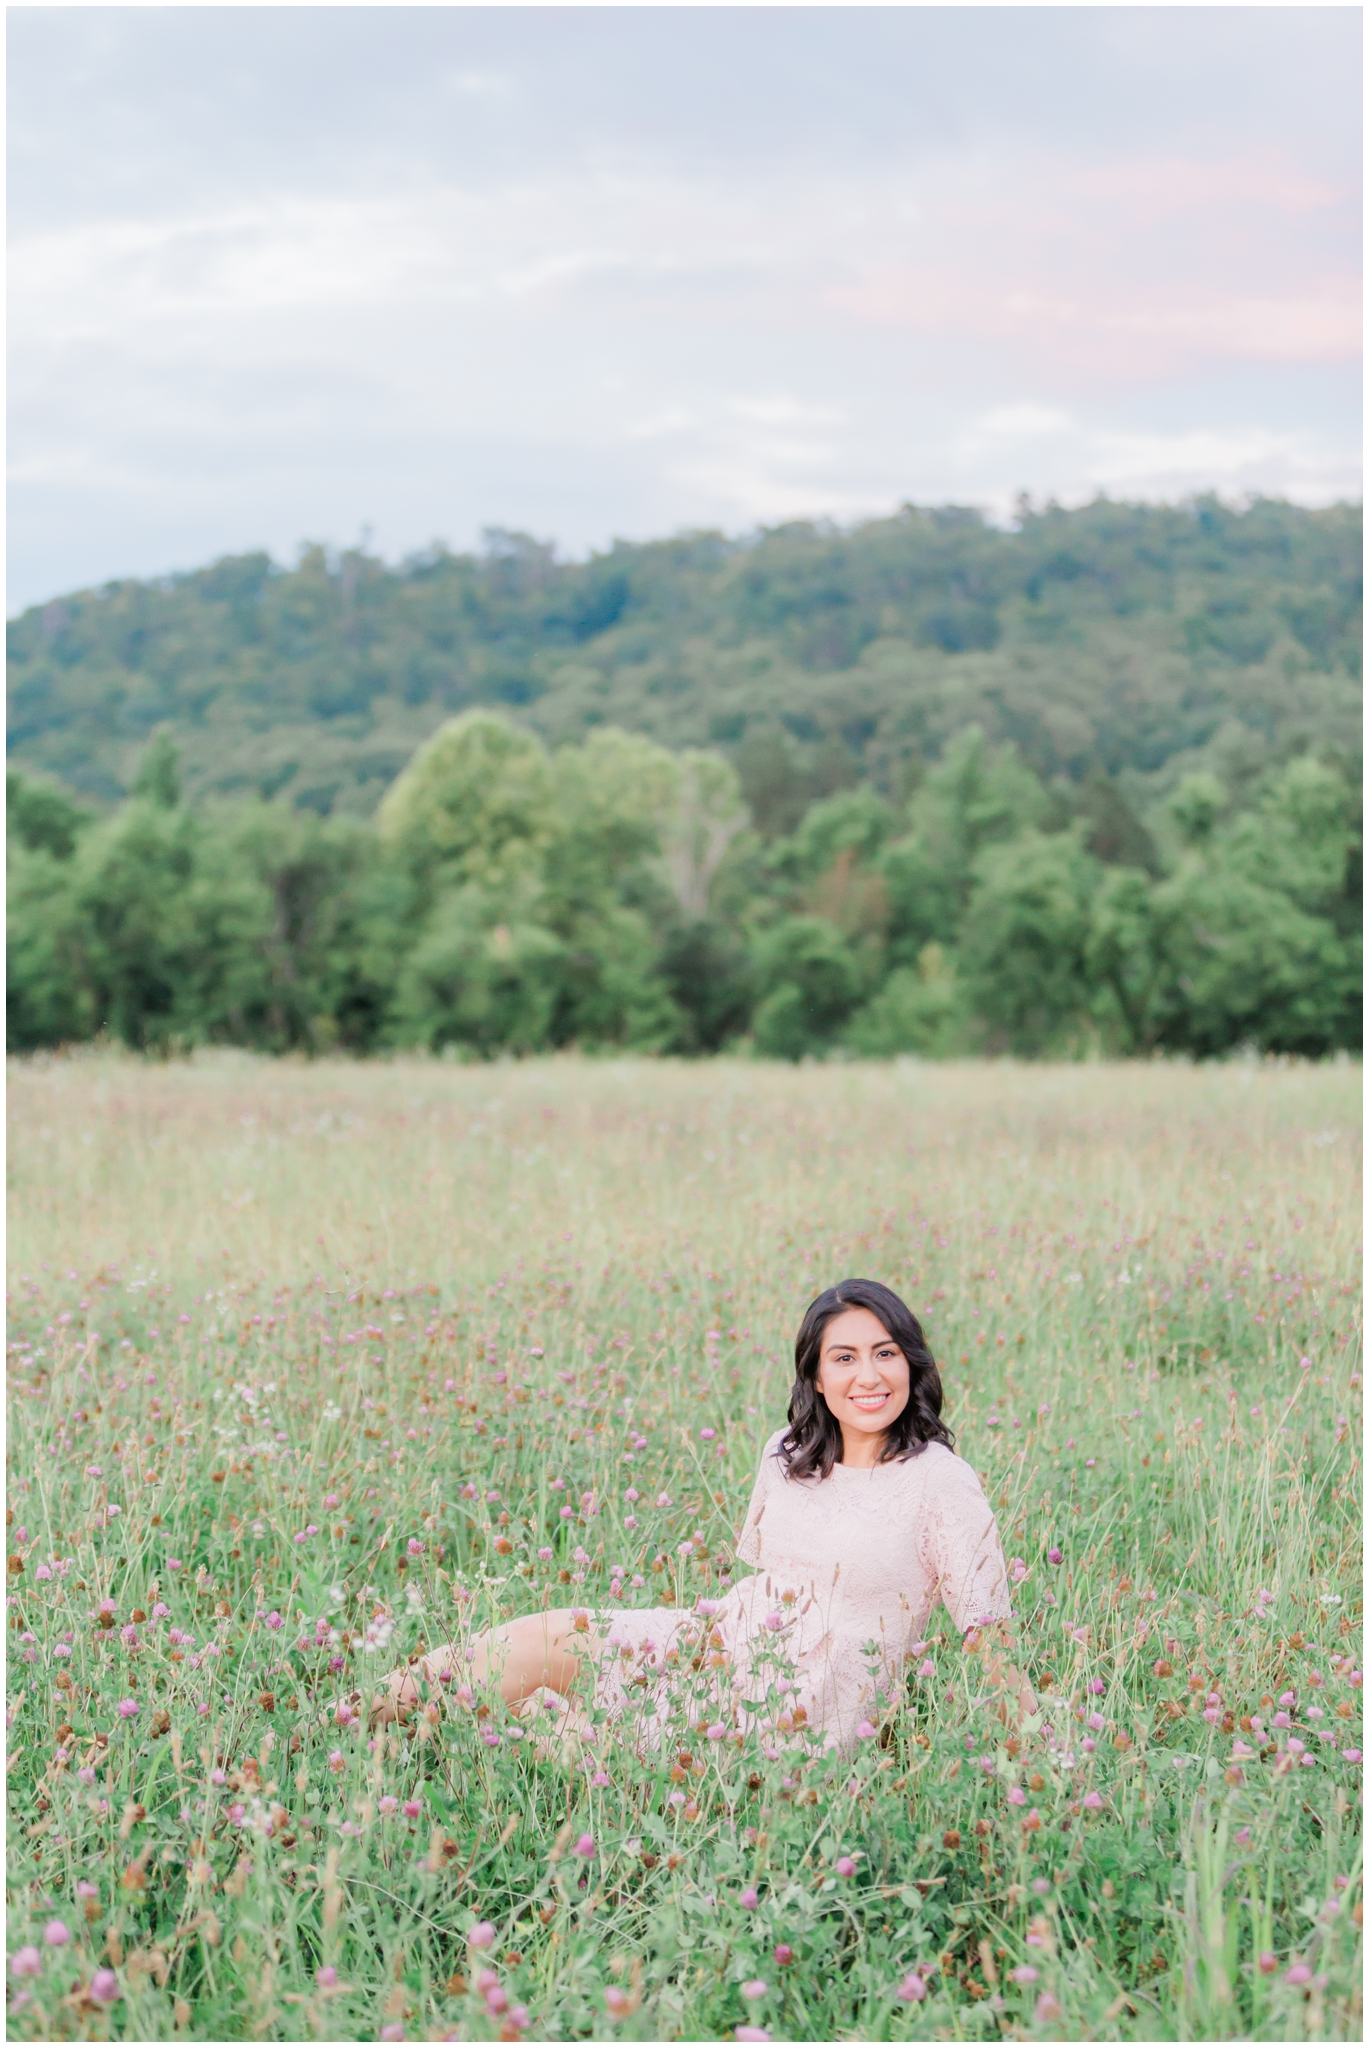 berenice's 27th birthday session in chattanooga tennessee by white oak mountain